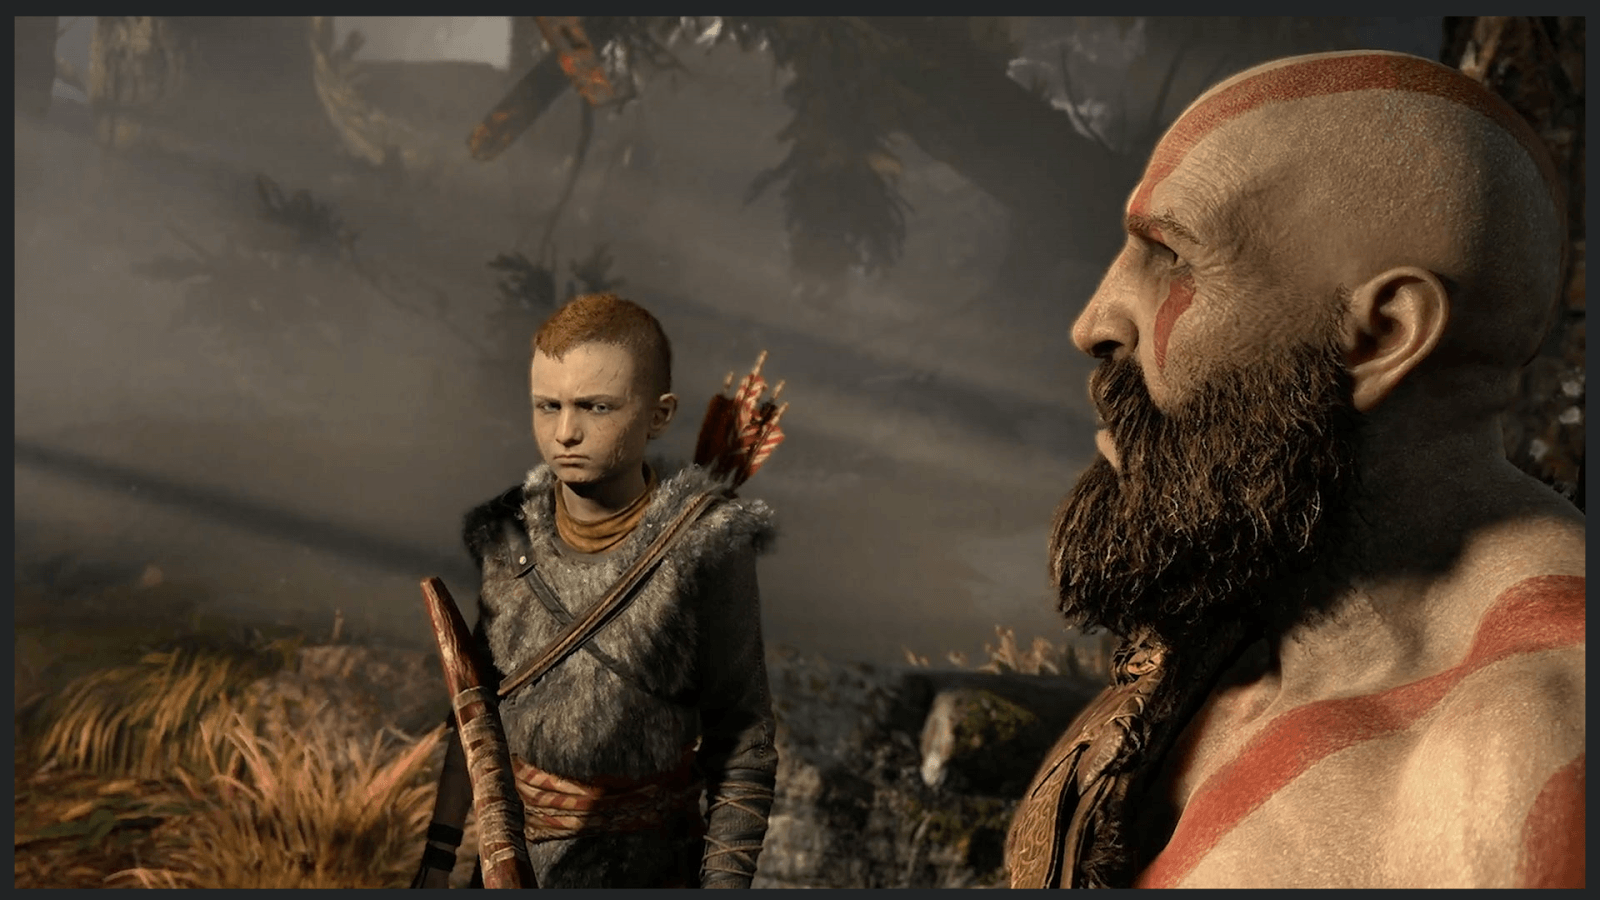 Blog: God of War: From Olympus to Valhalla! of War Project